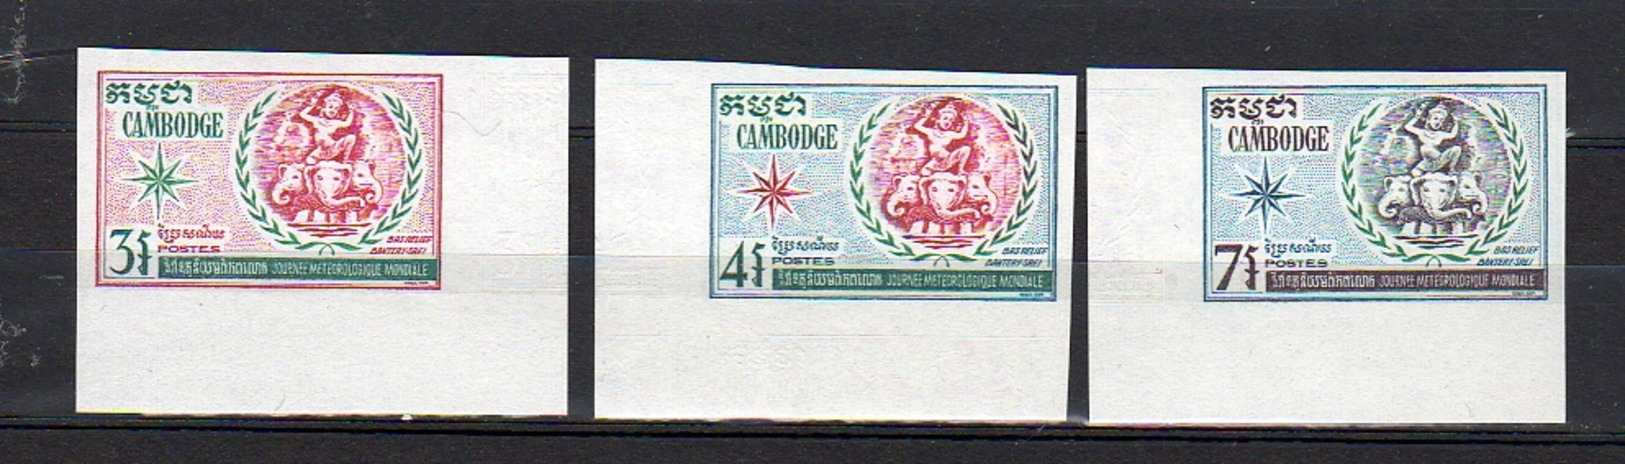 1970 UIT Meteorological Year MNH Very Fine IMPERFORATED PROOFS. Rare And Hard To Find These Days (c34a) - Cambodja